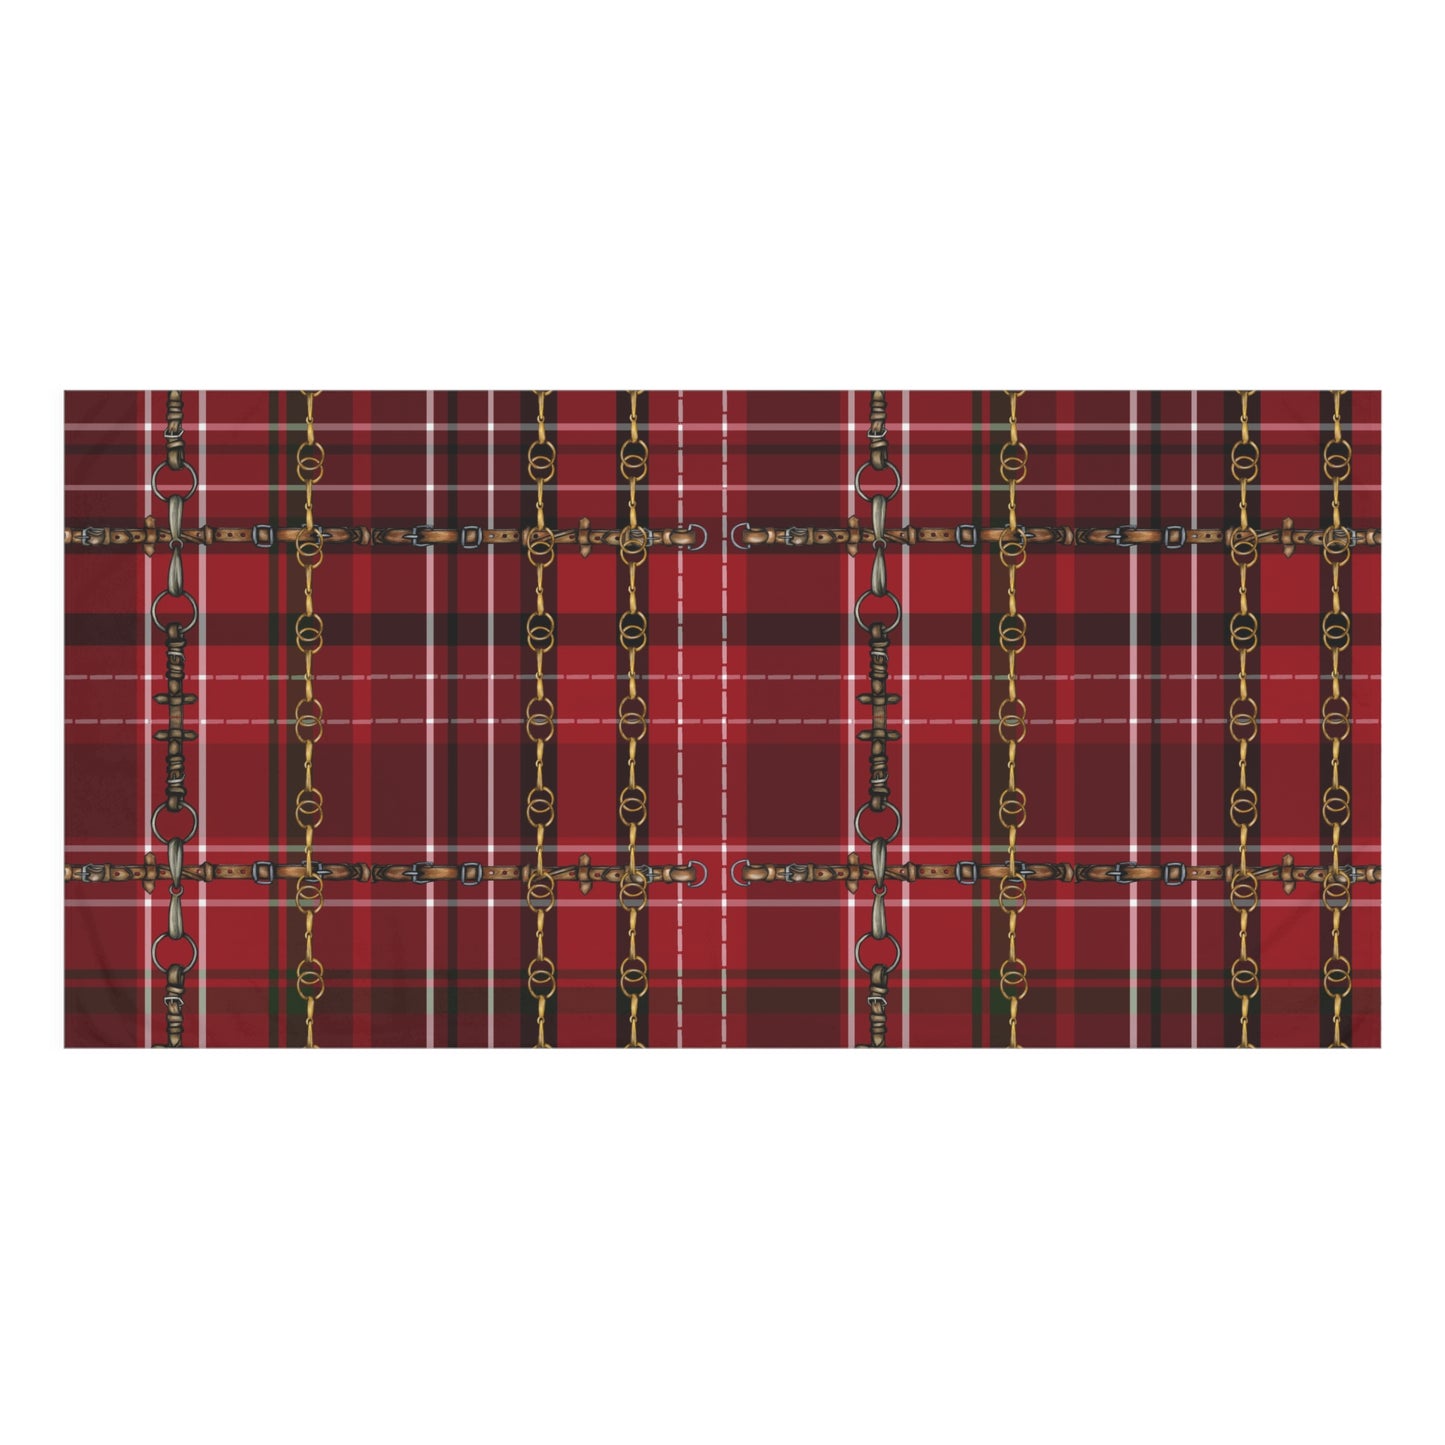 Christmas Plaid and Snaffle Bit And Reins Design . My artwork on Plaid Horse Luxury Bath Towel